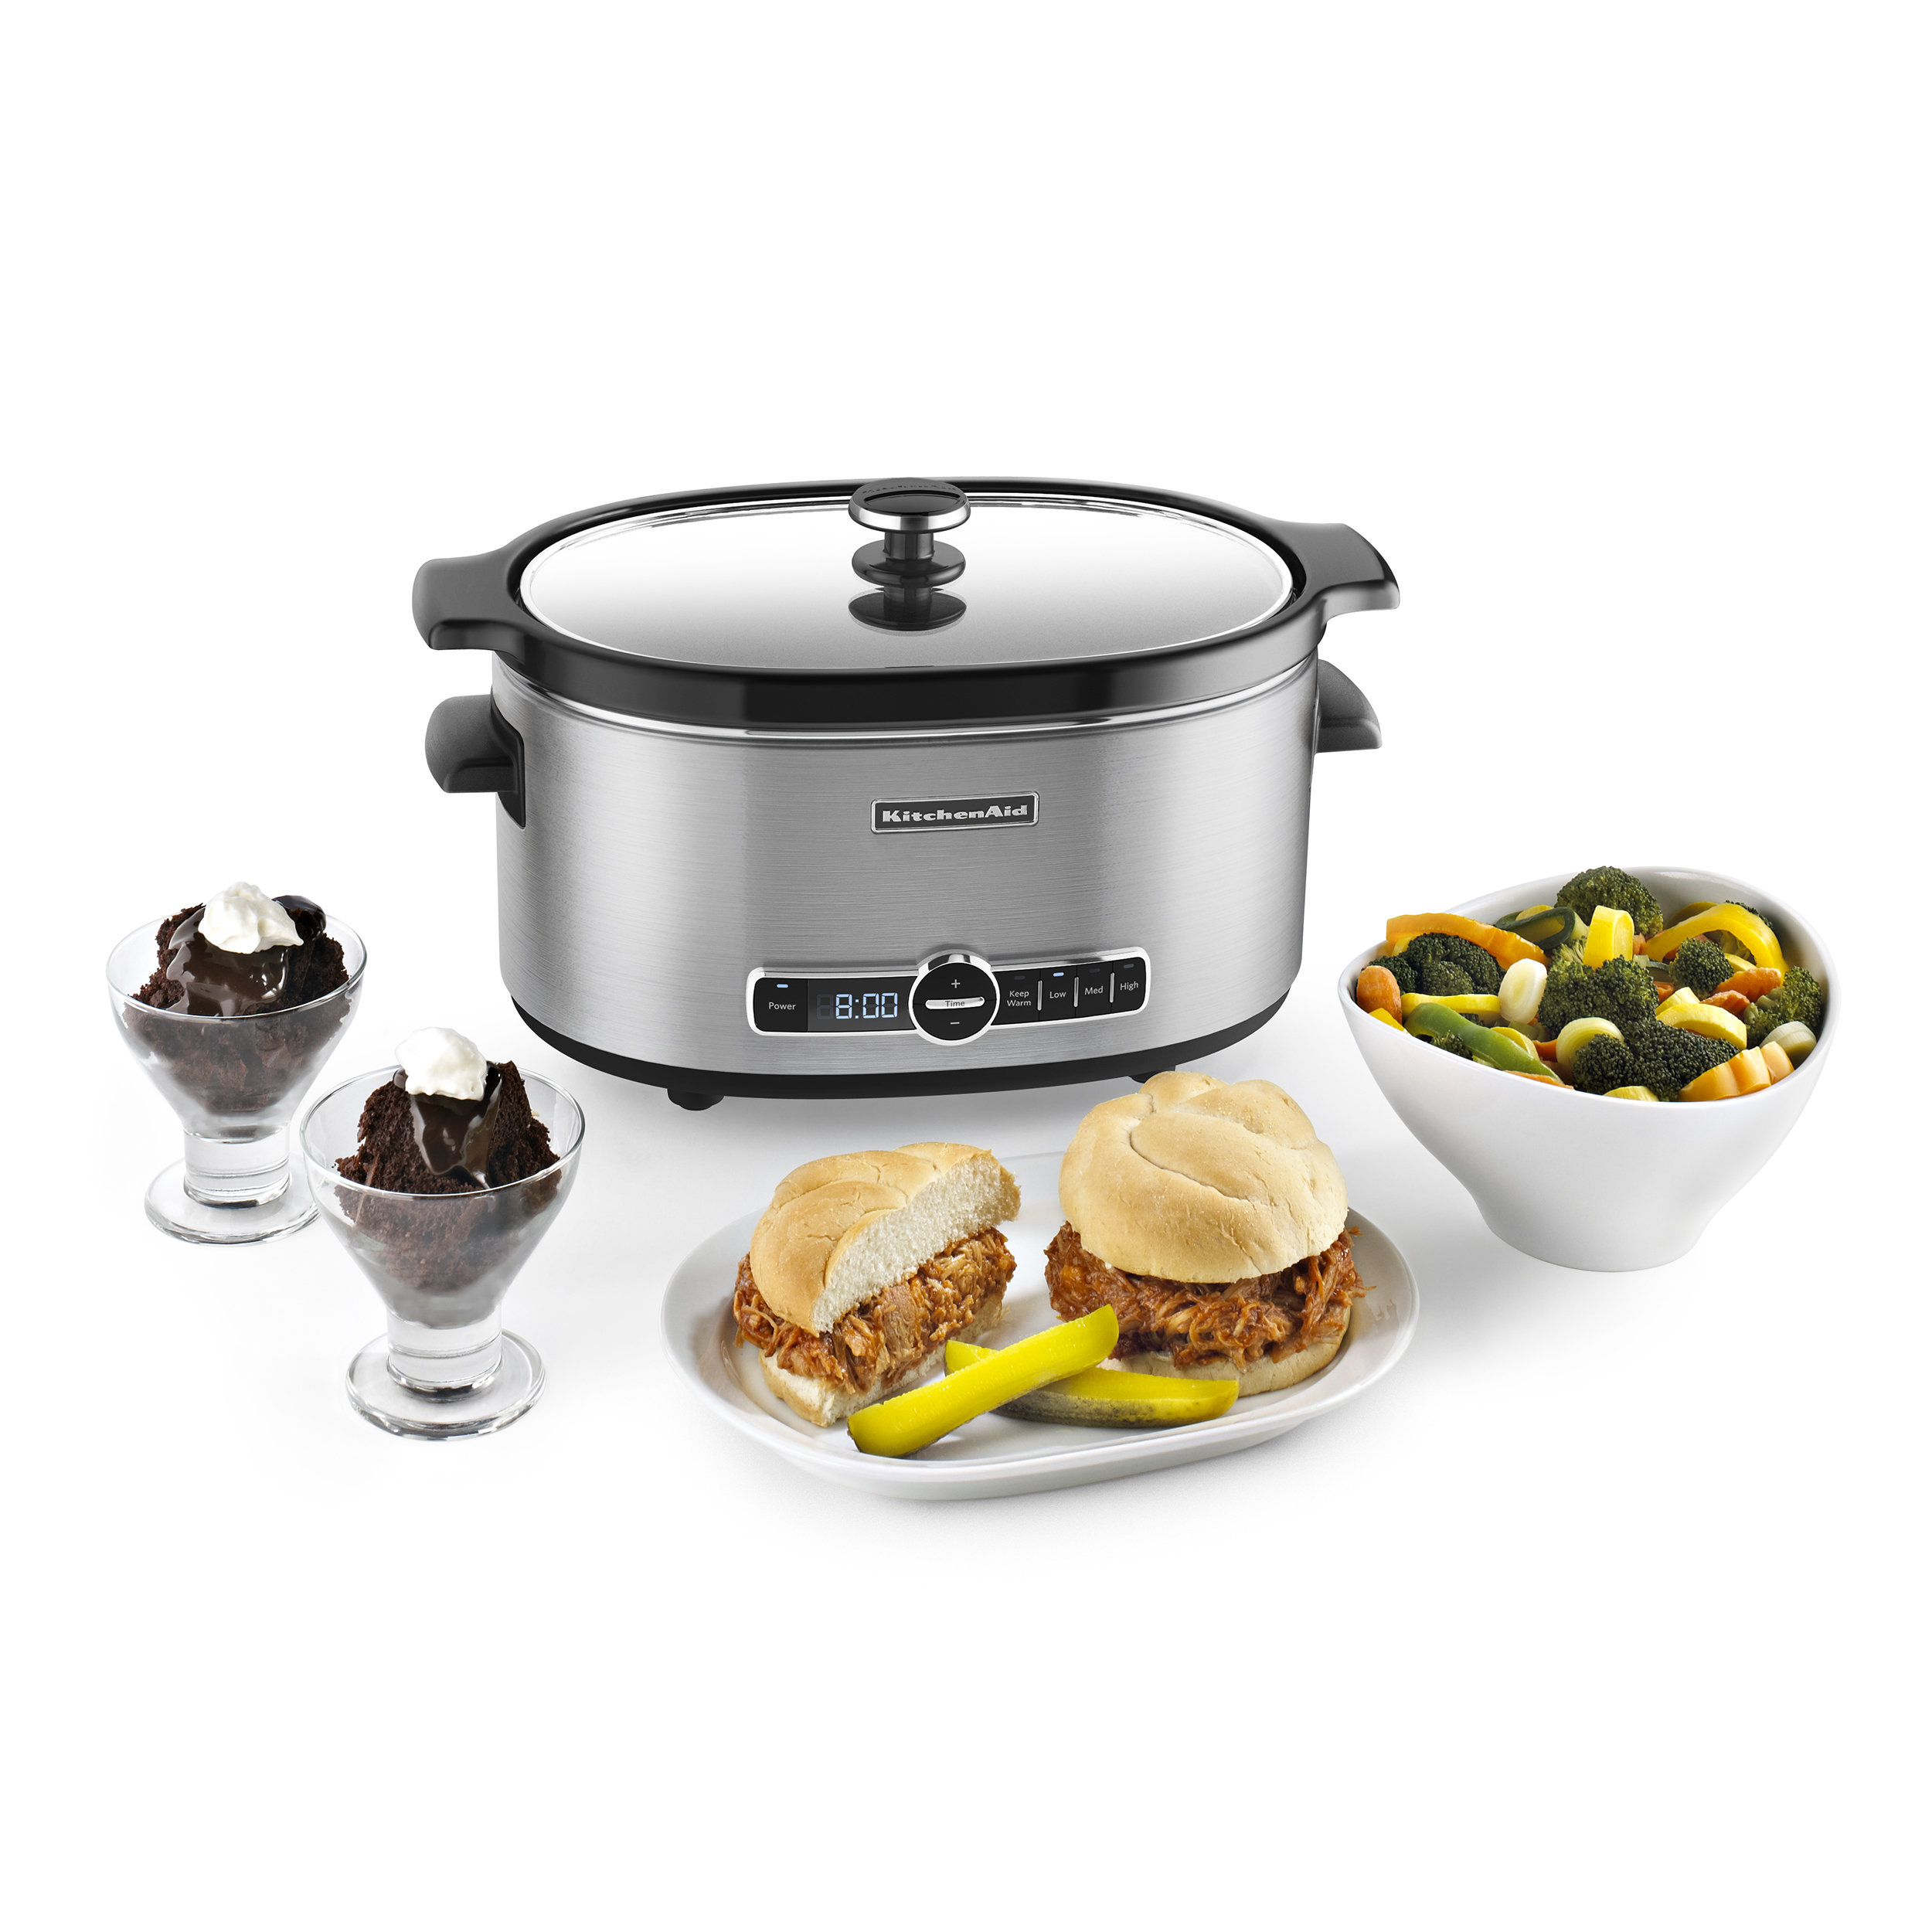 KitchenAid 6-Quart Slow Cooker with Solid Glass Lid